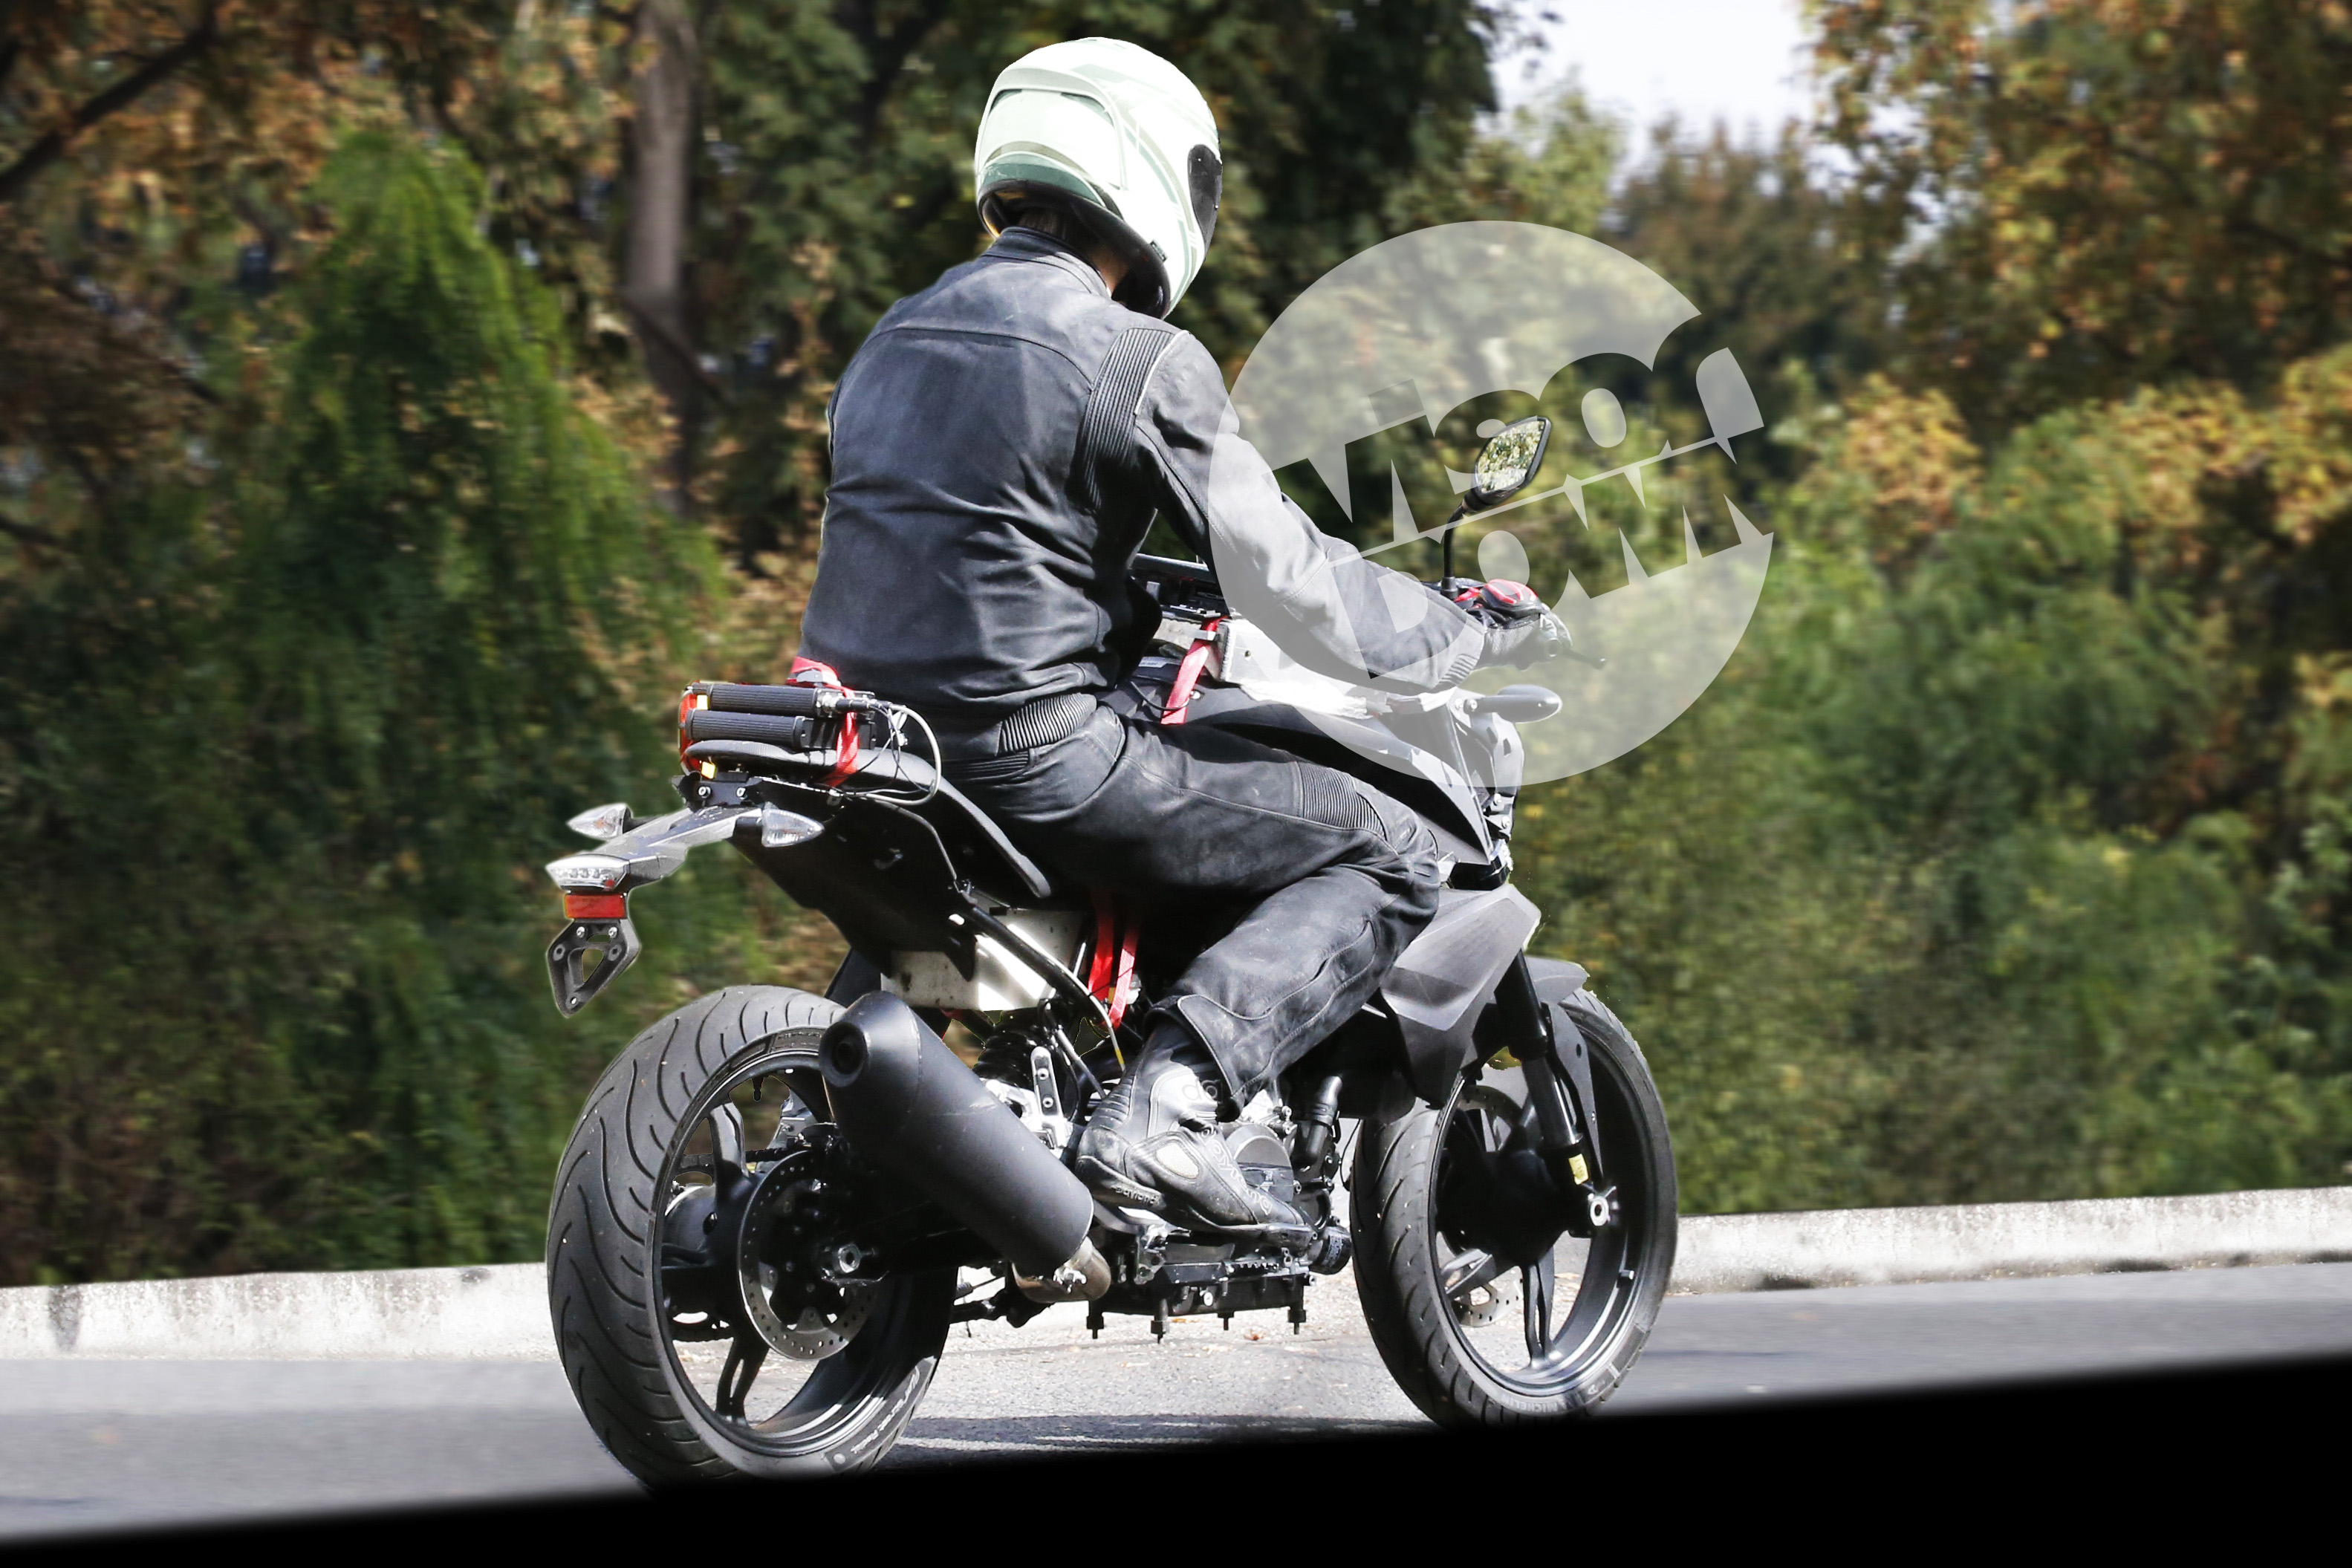 Spy shots: small-capacity naked BMW spied testing